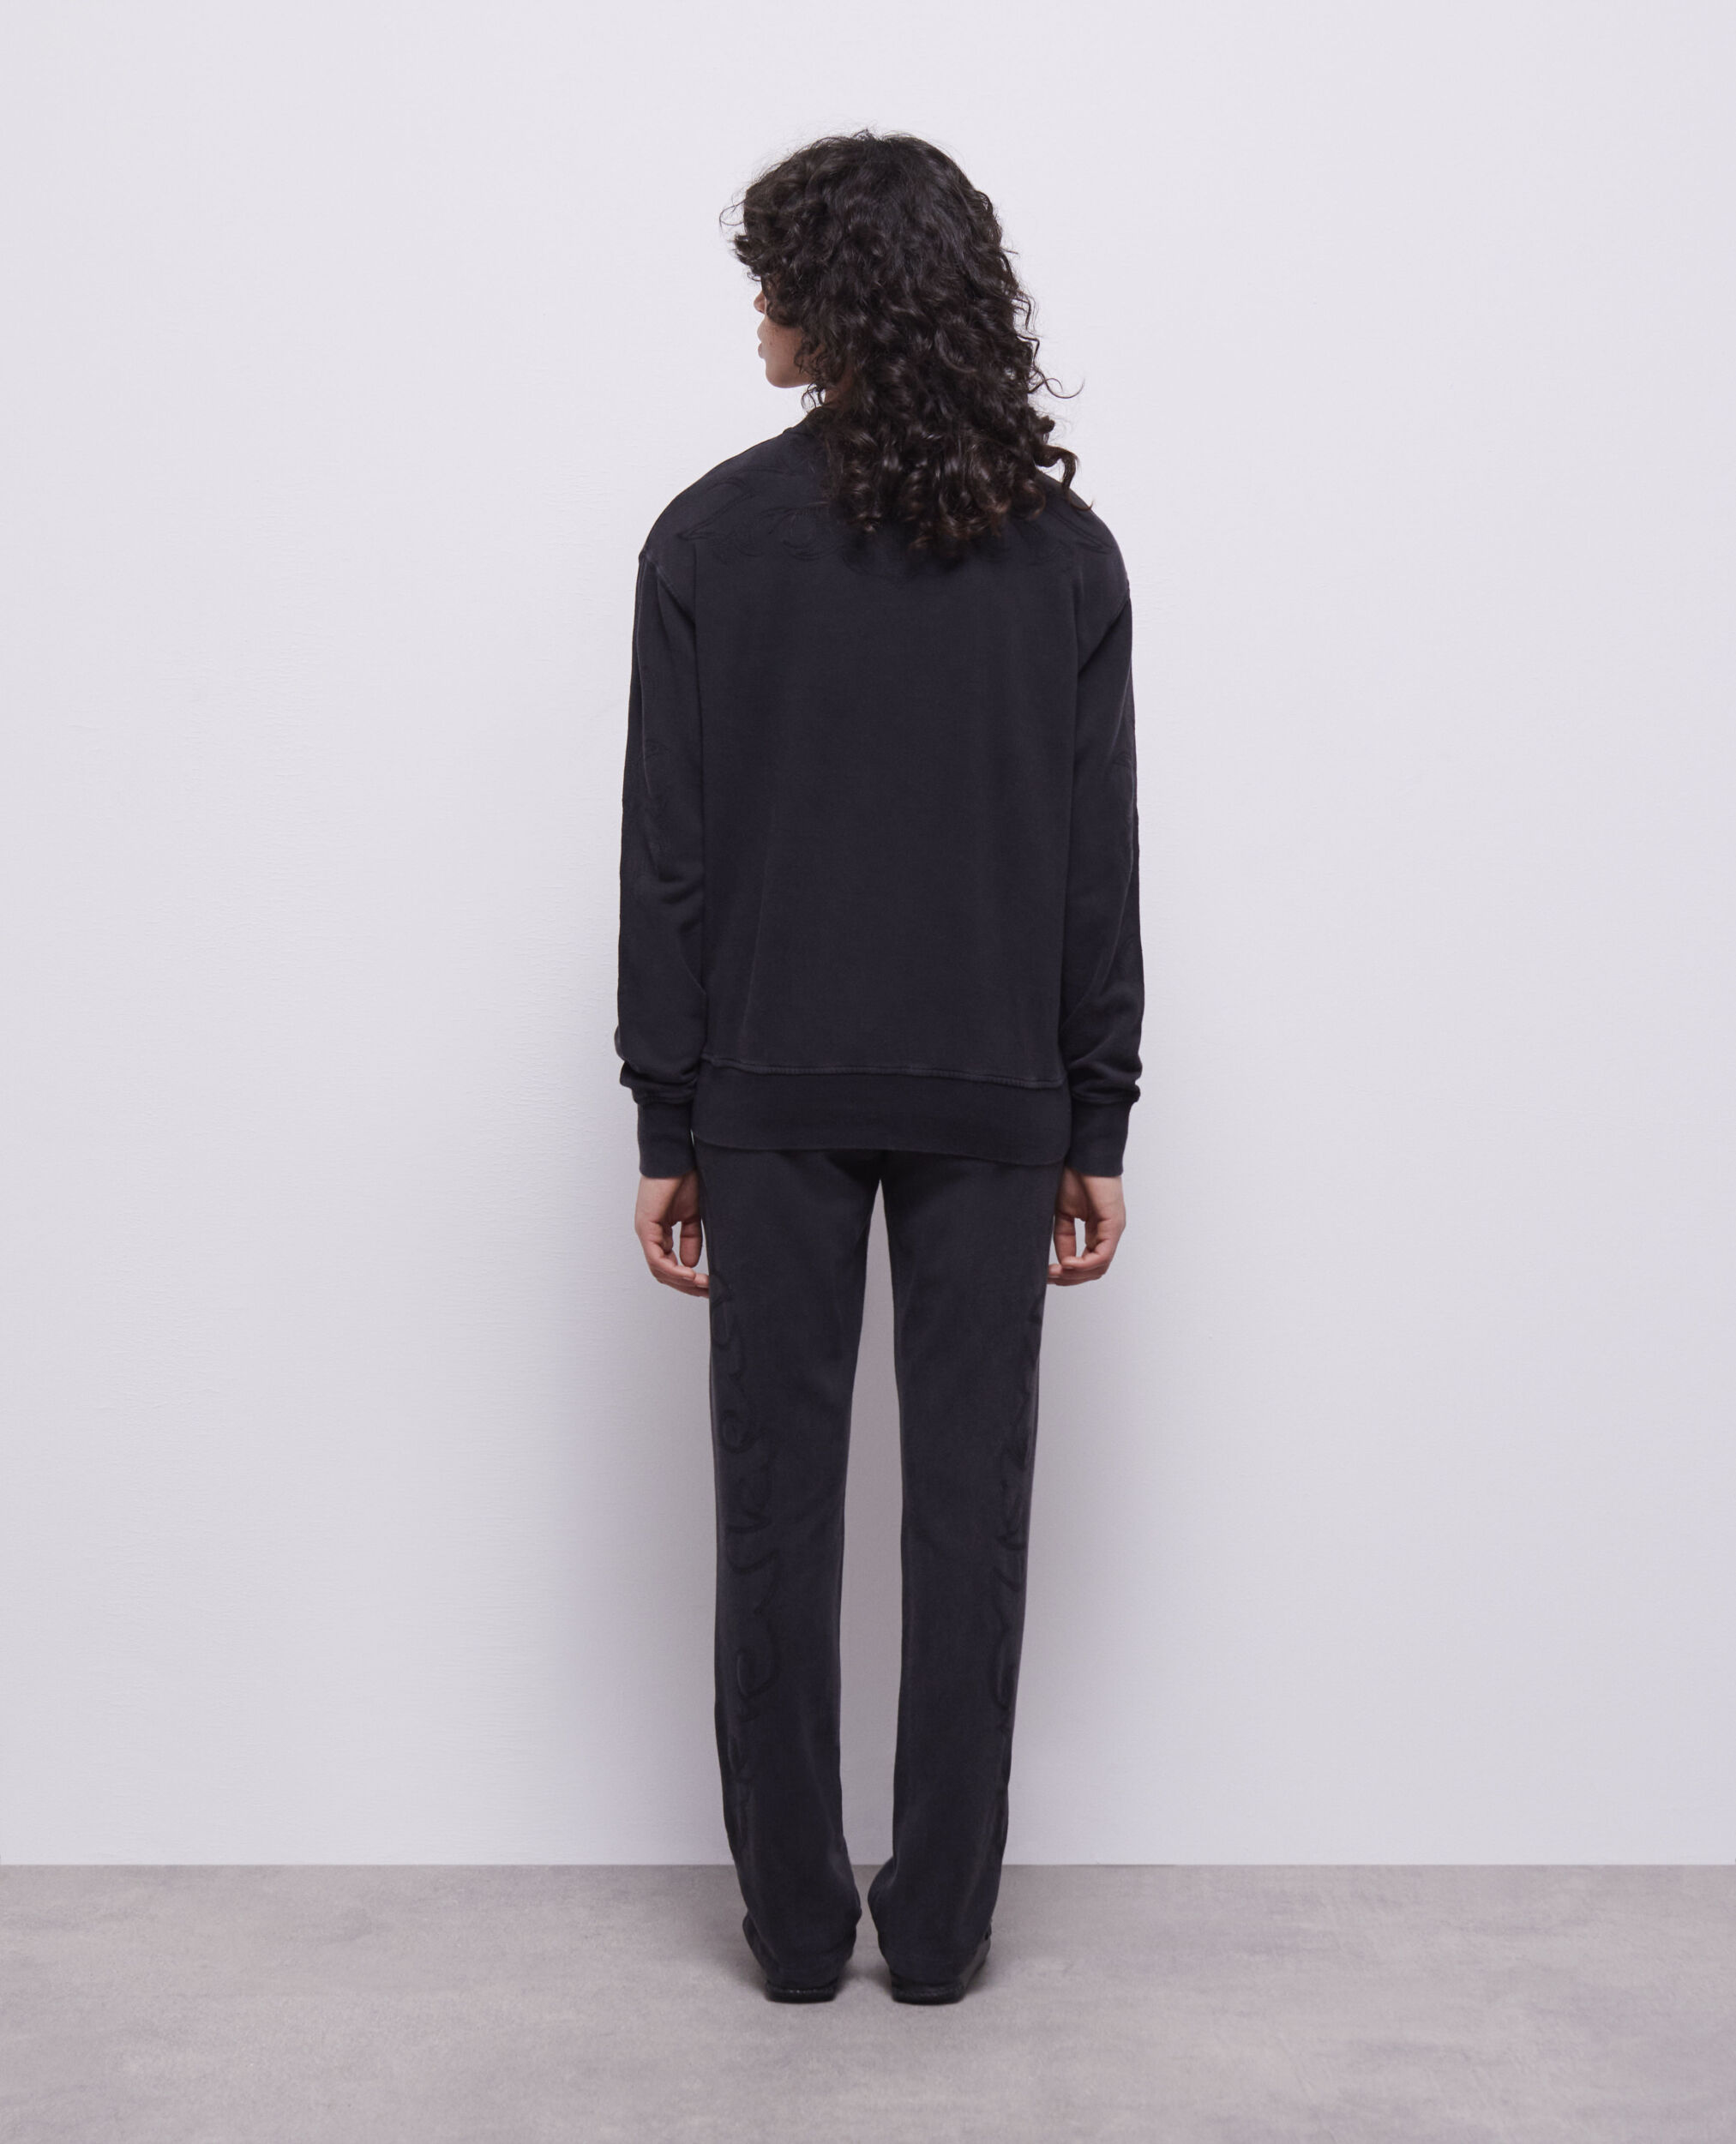 Black sweatshirt with Western-style embroidery, BLACK WASHED, hi-res image number null